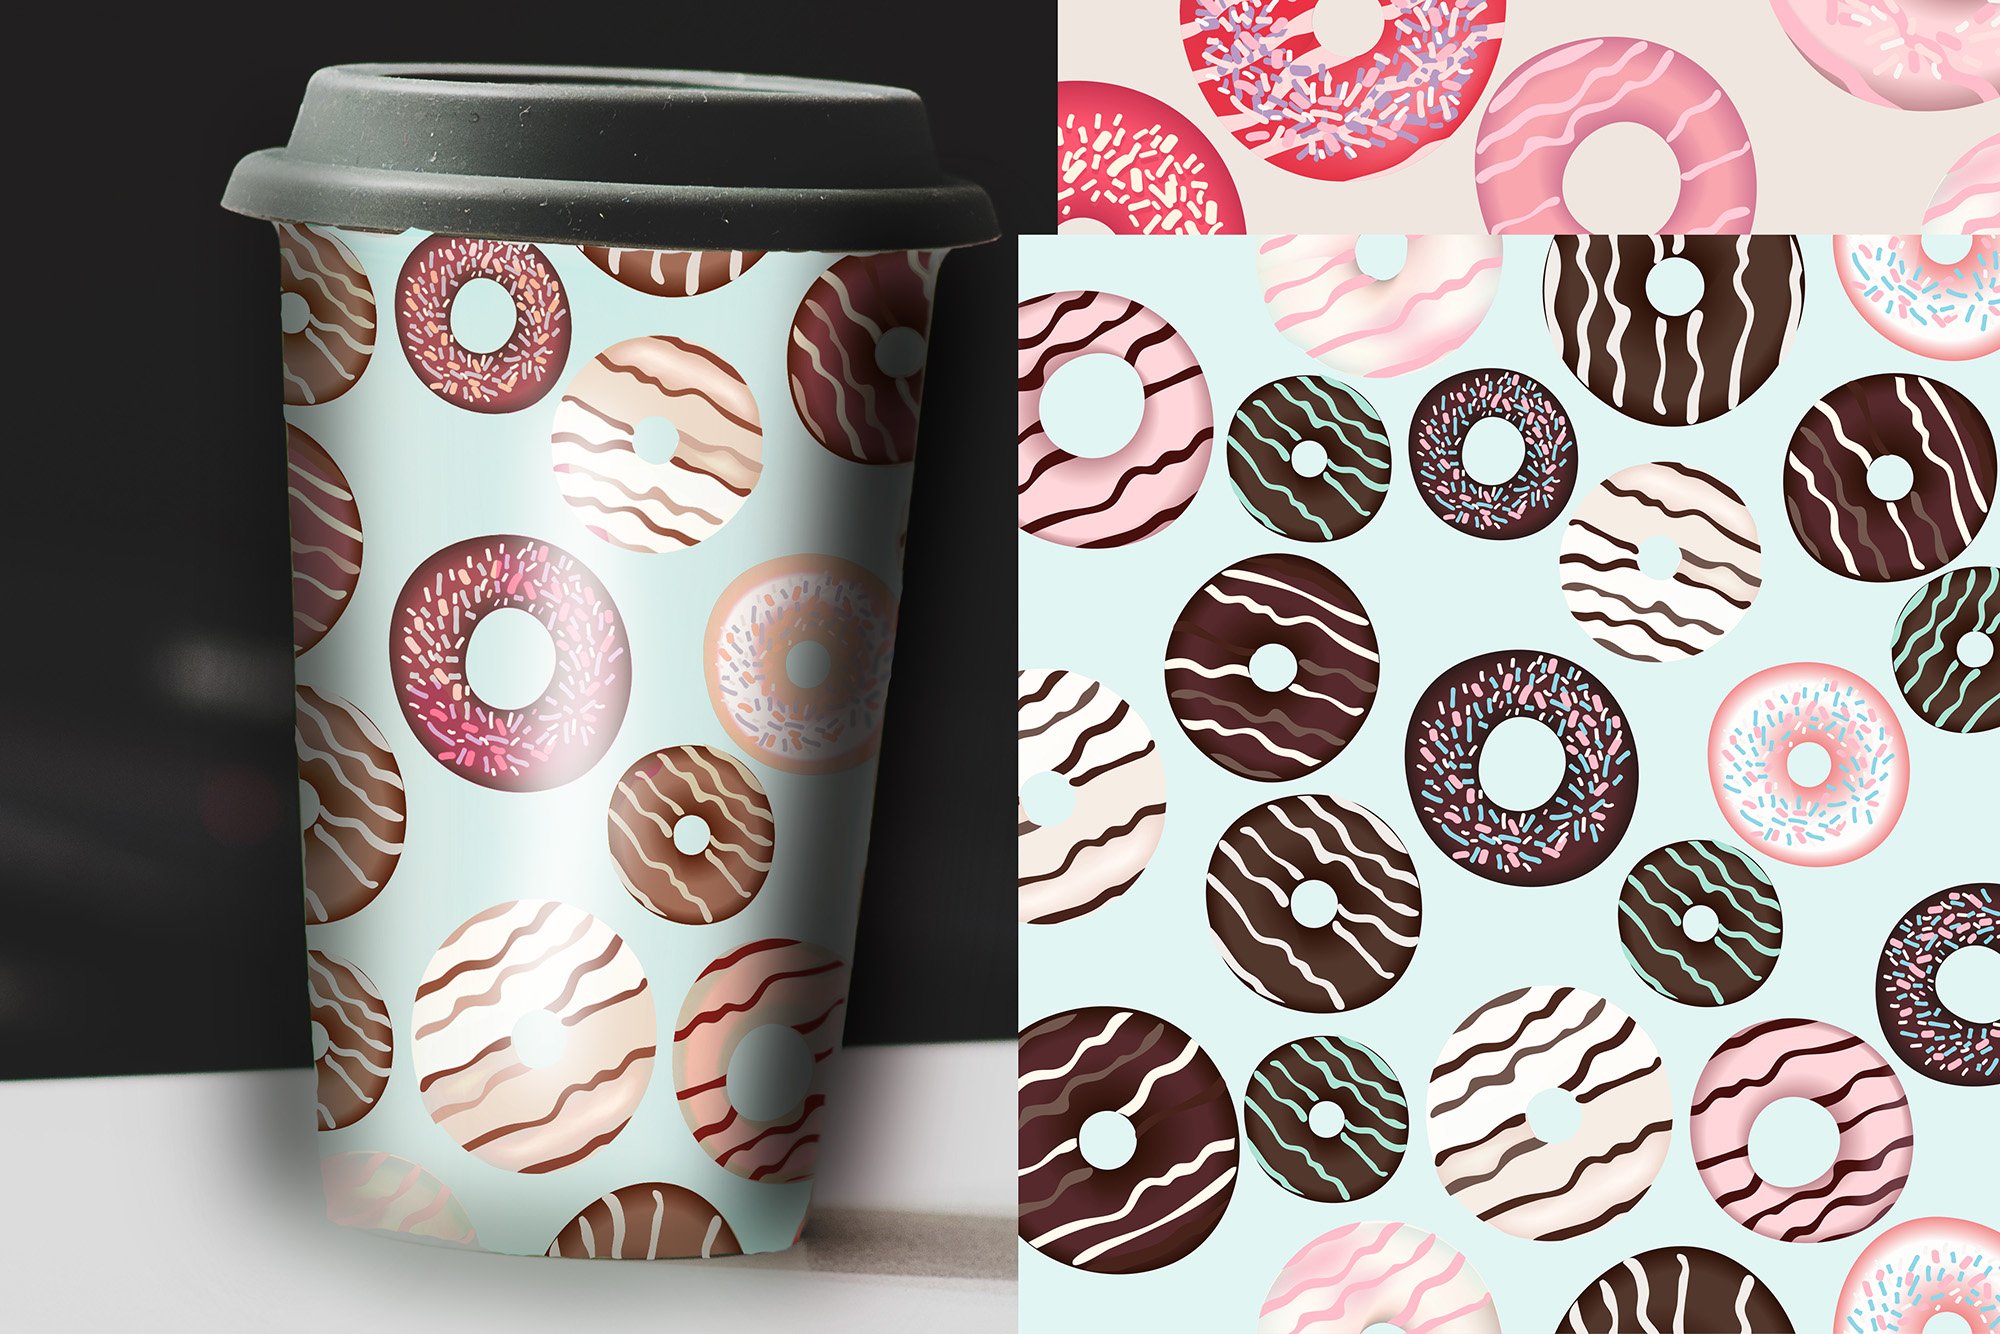 Cool donuts choice for paper cup.